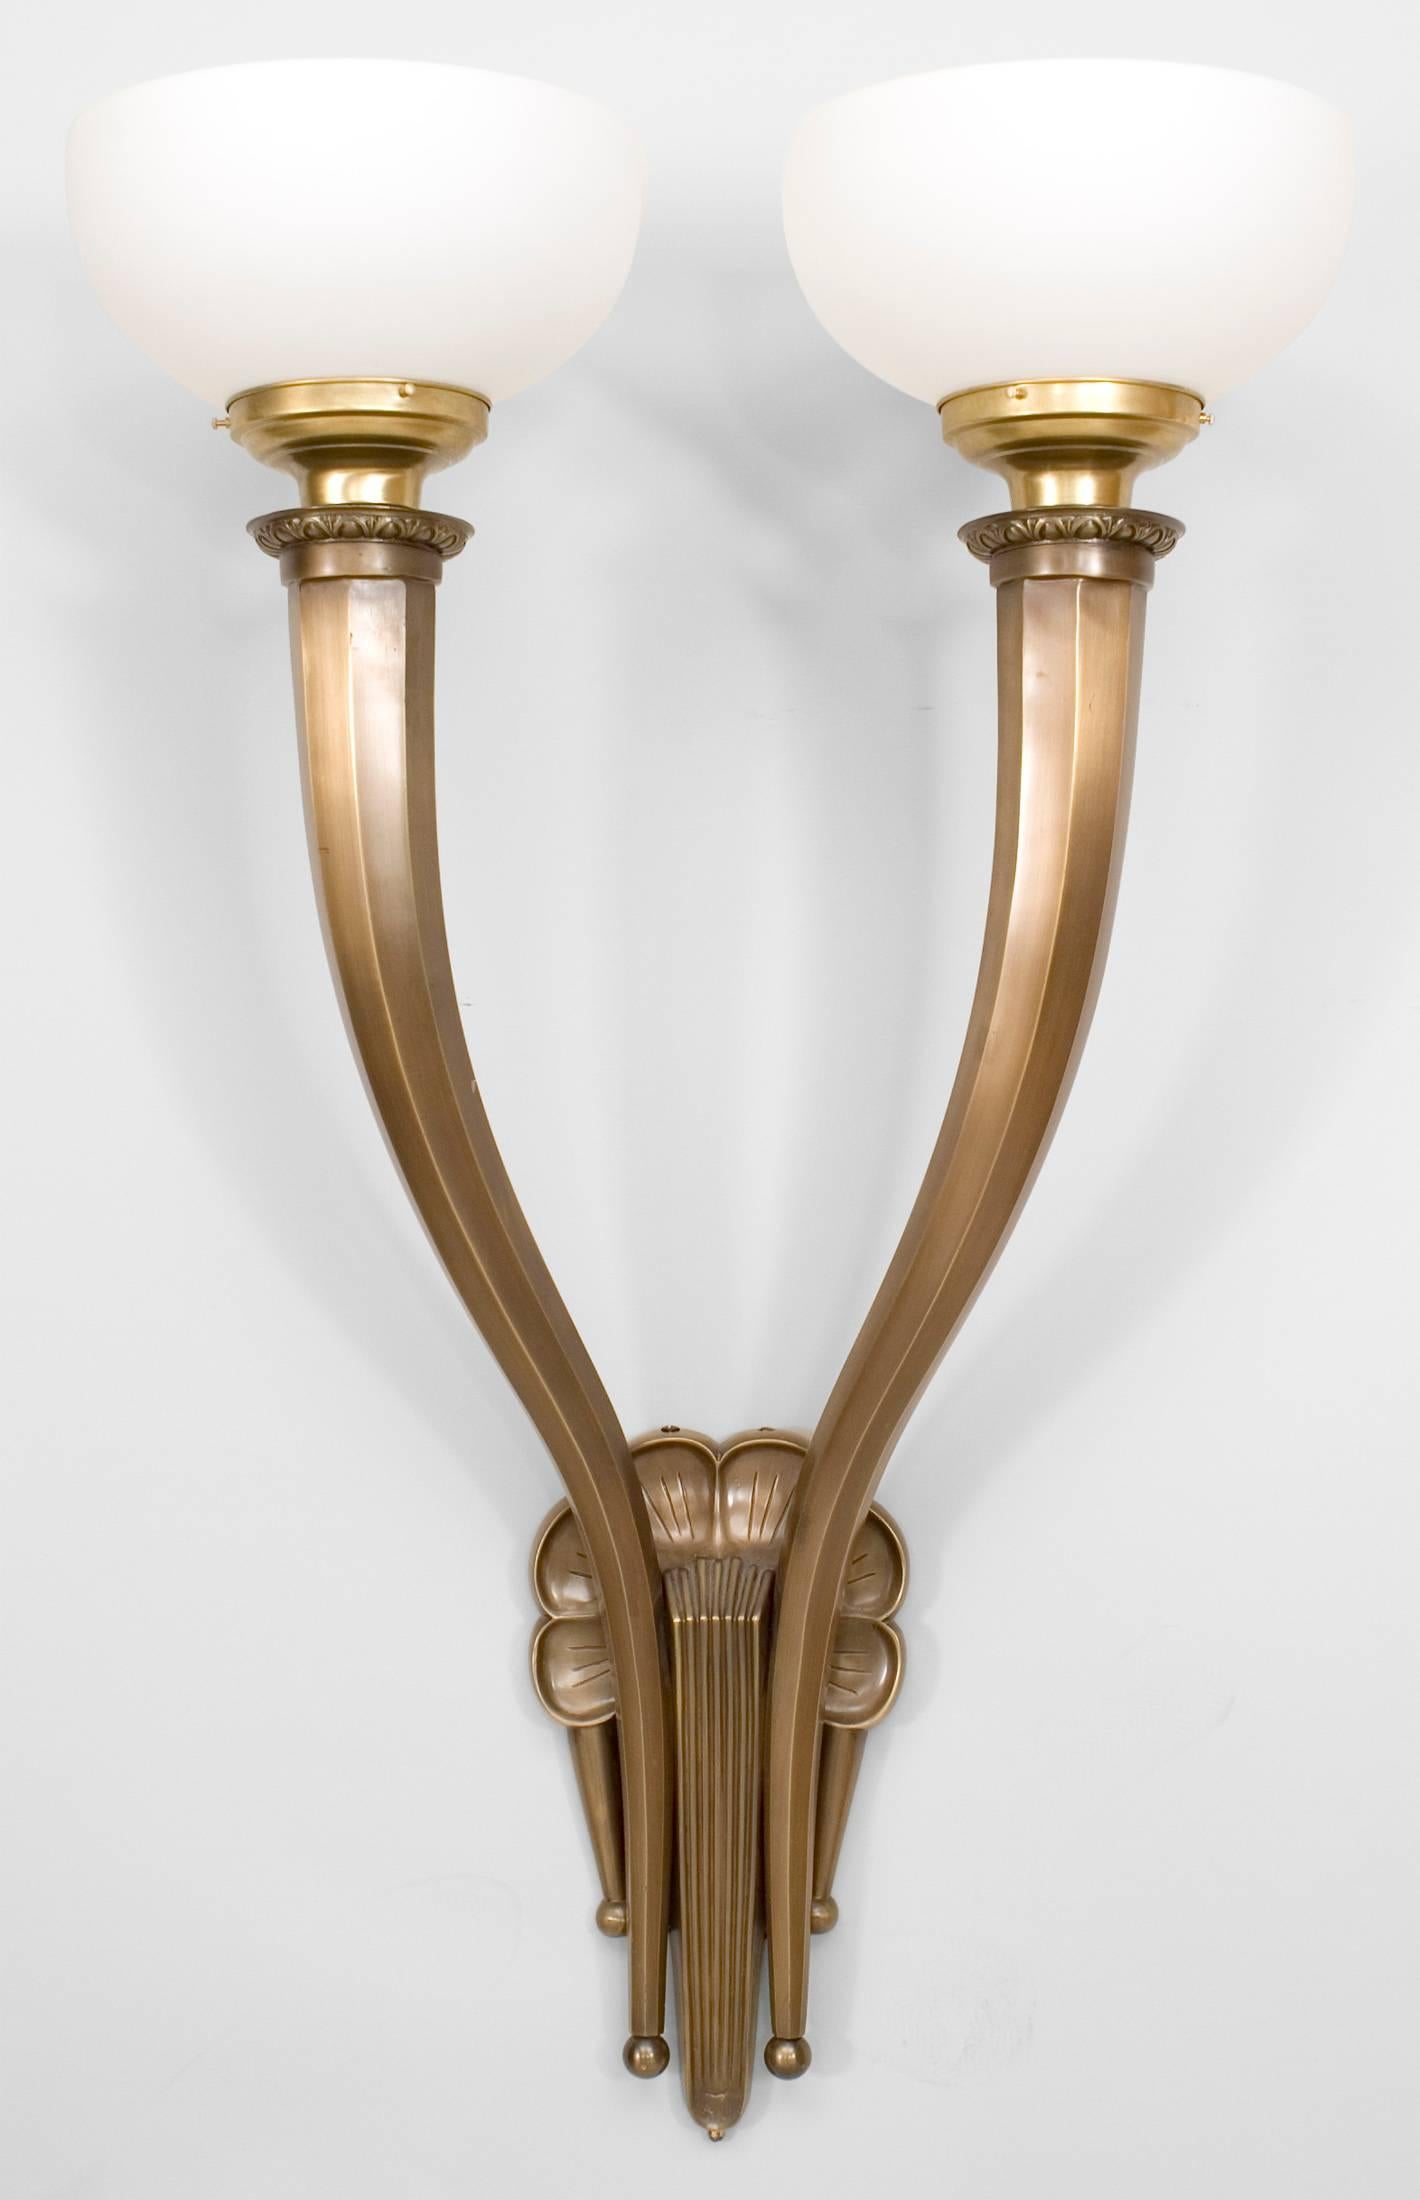 Pair of American Art Deco monumental bronze wall sconces with two eight-sided arms, fluted and scalloped backplates, and frosted glass shades. (PRICED AS Pair)
